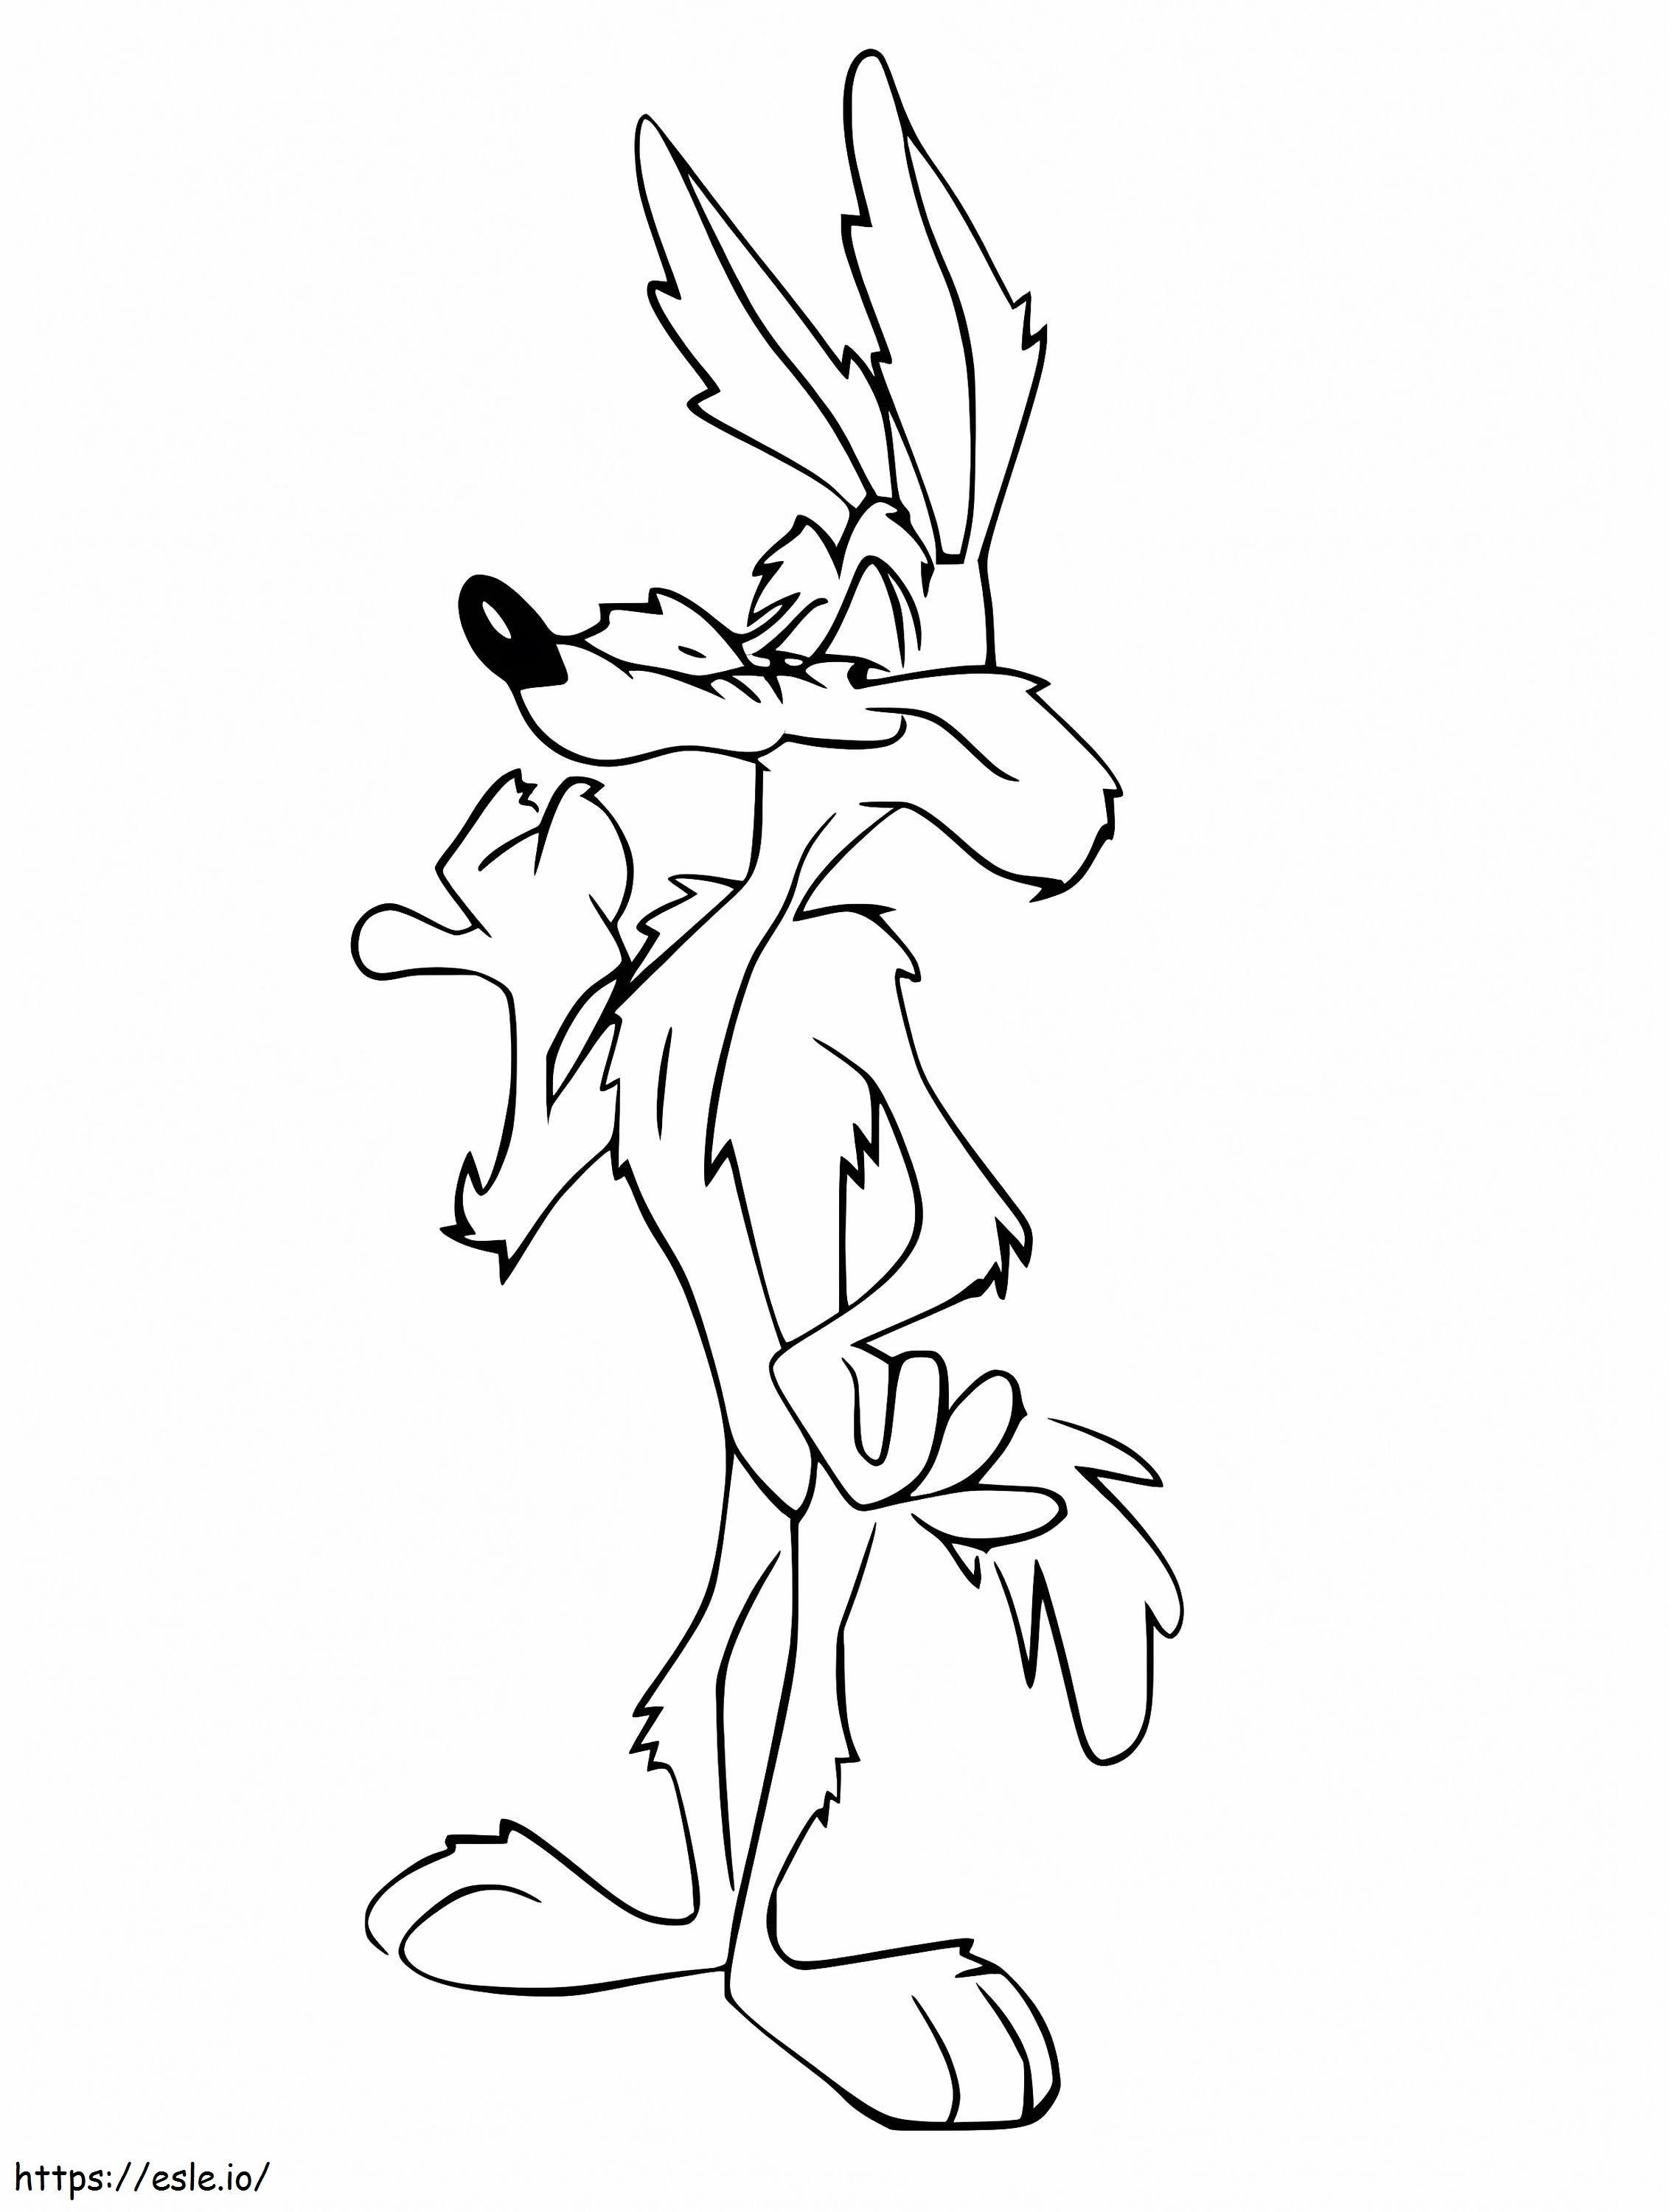 Proud Wile E Coyote coloring page